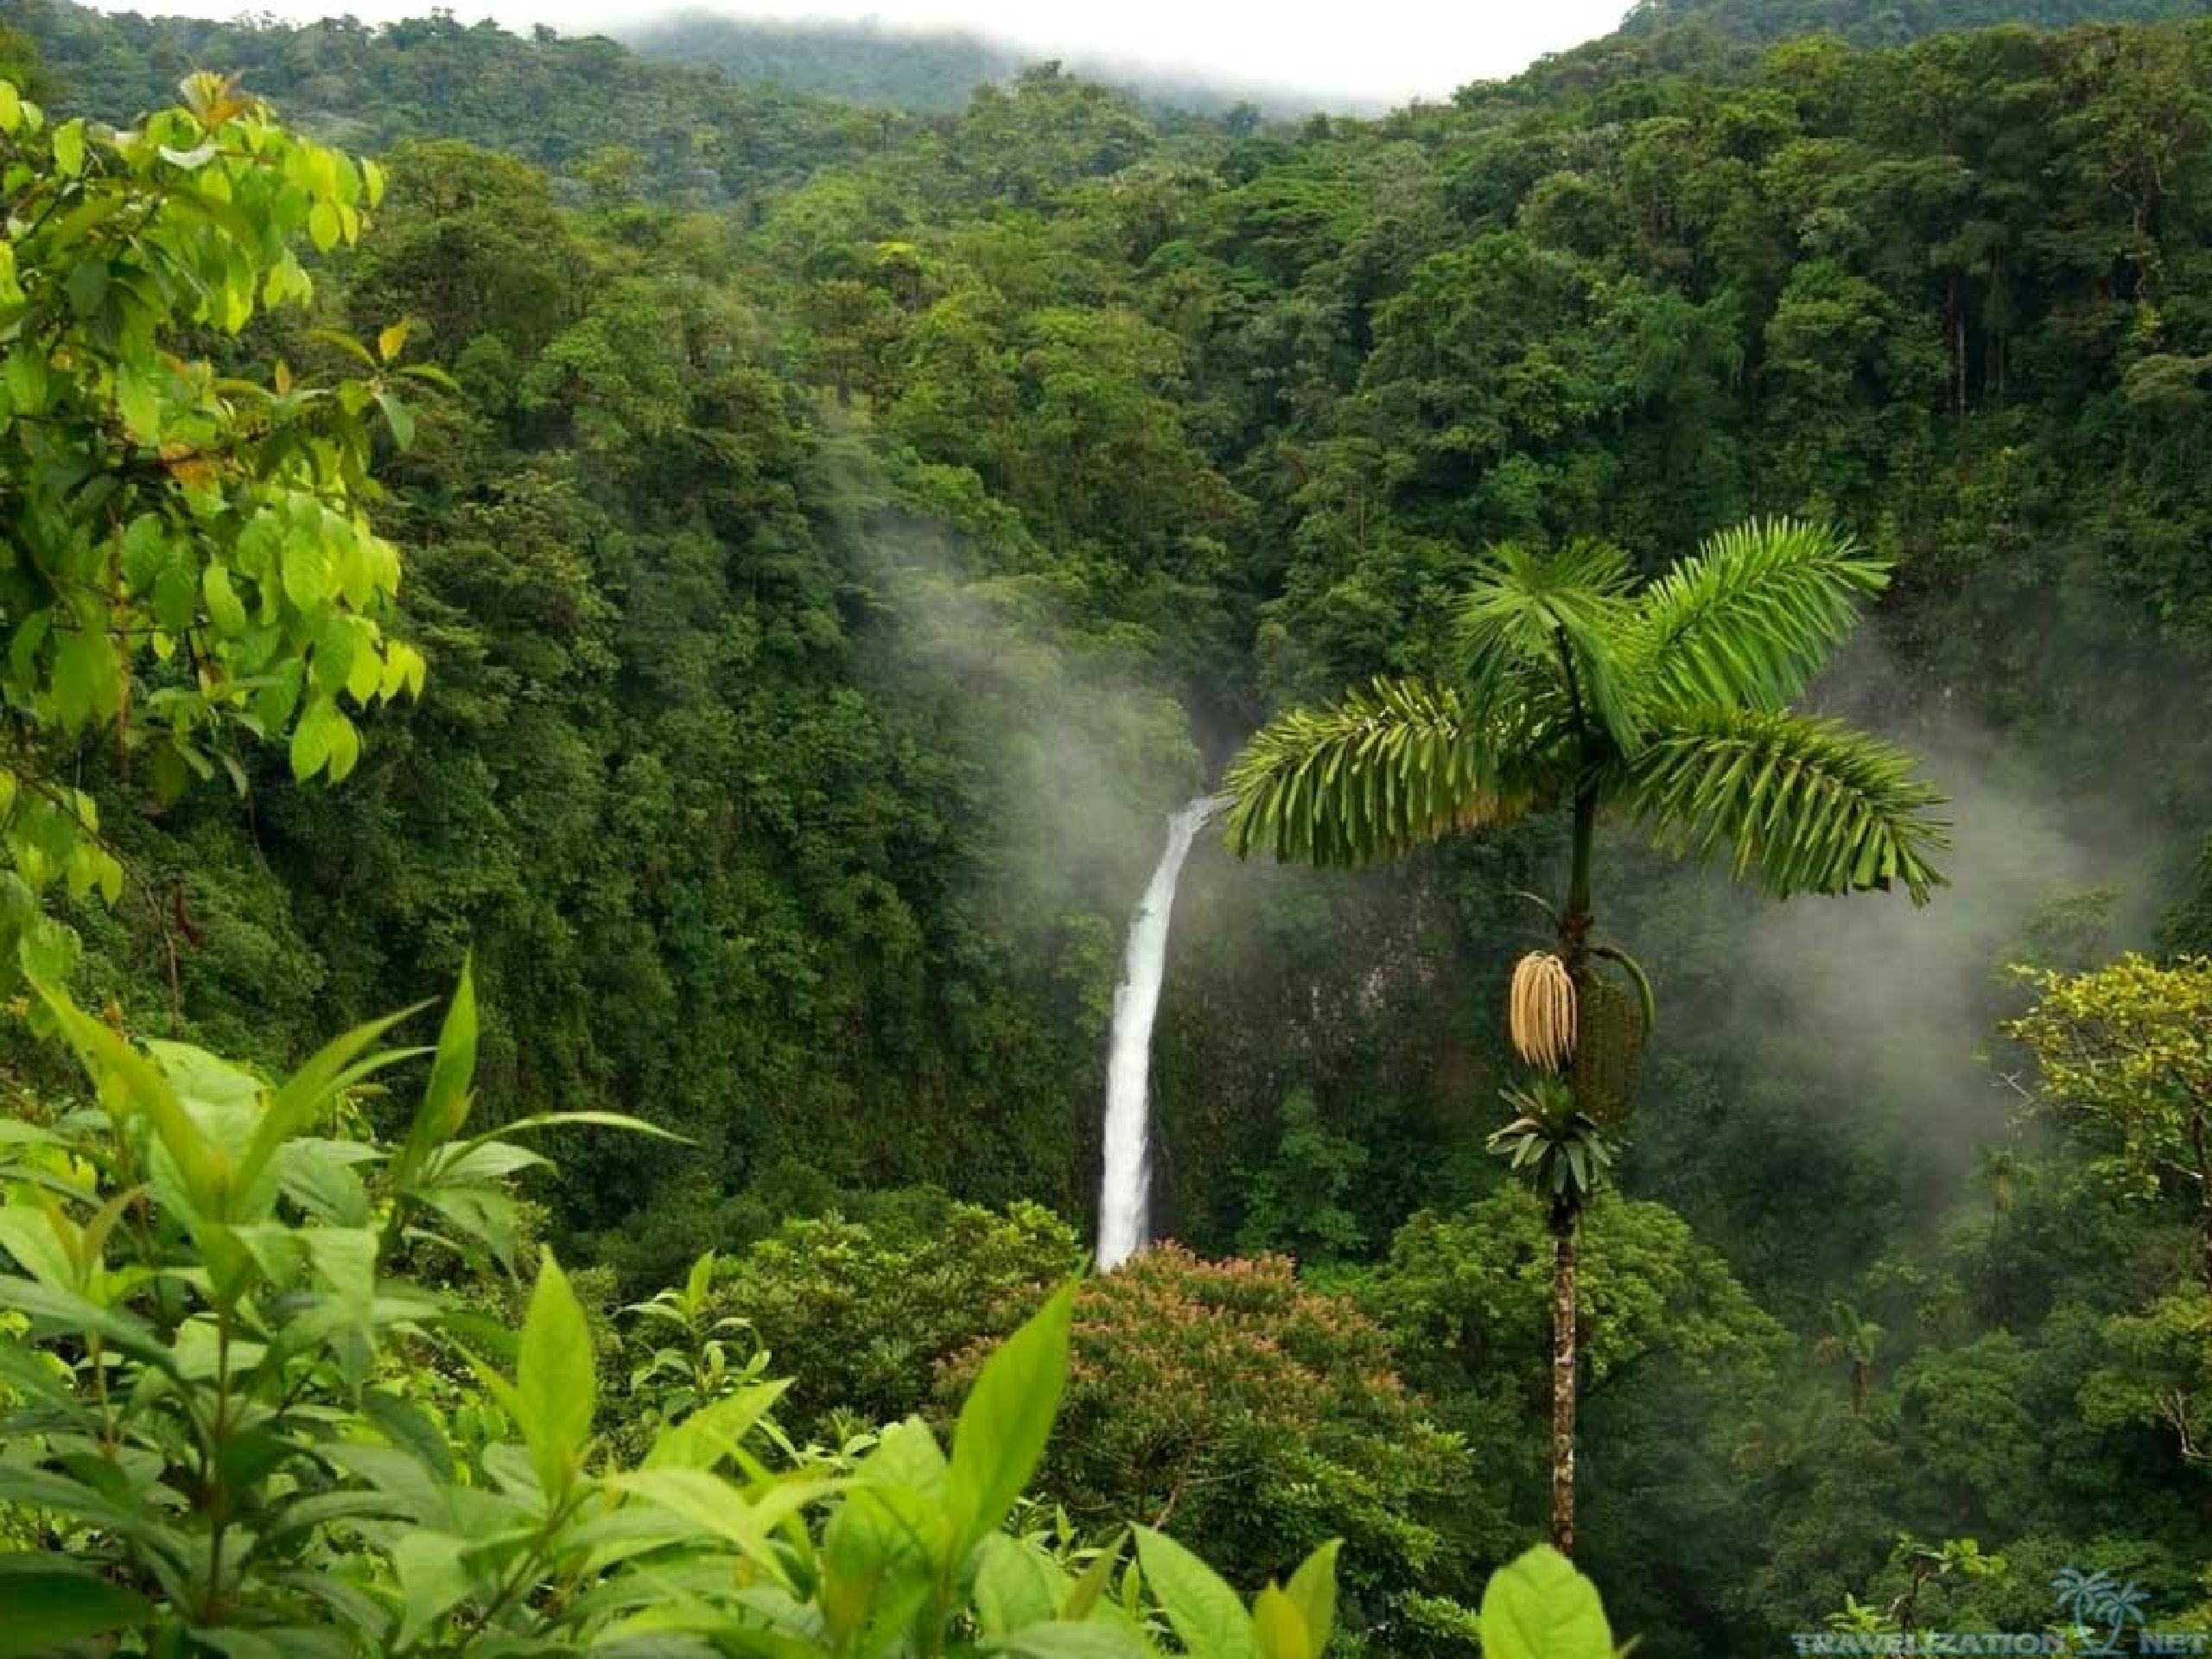 2560x1920 #Rainforest | Rainforest Awesome Sceneries Of Jungle Travelization Wallpaper  with .